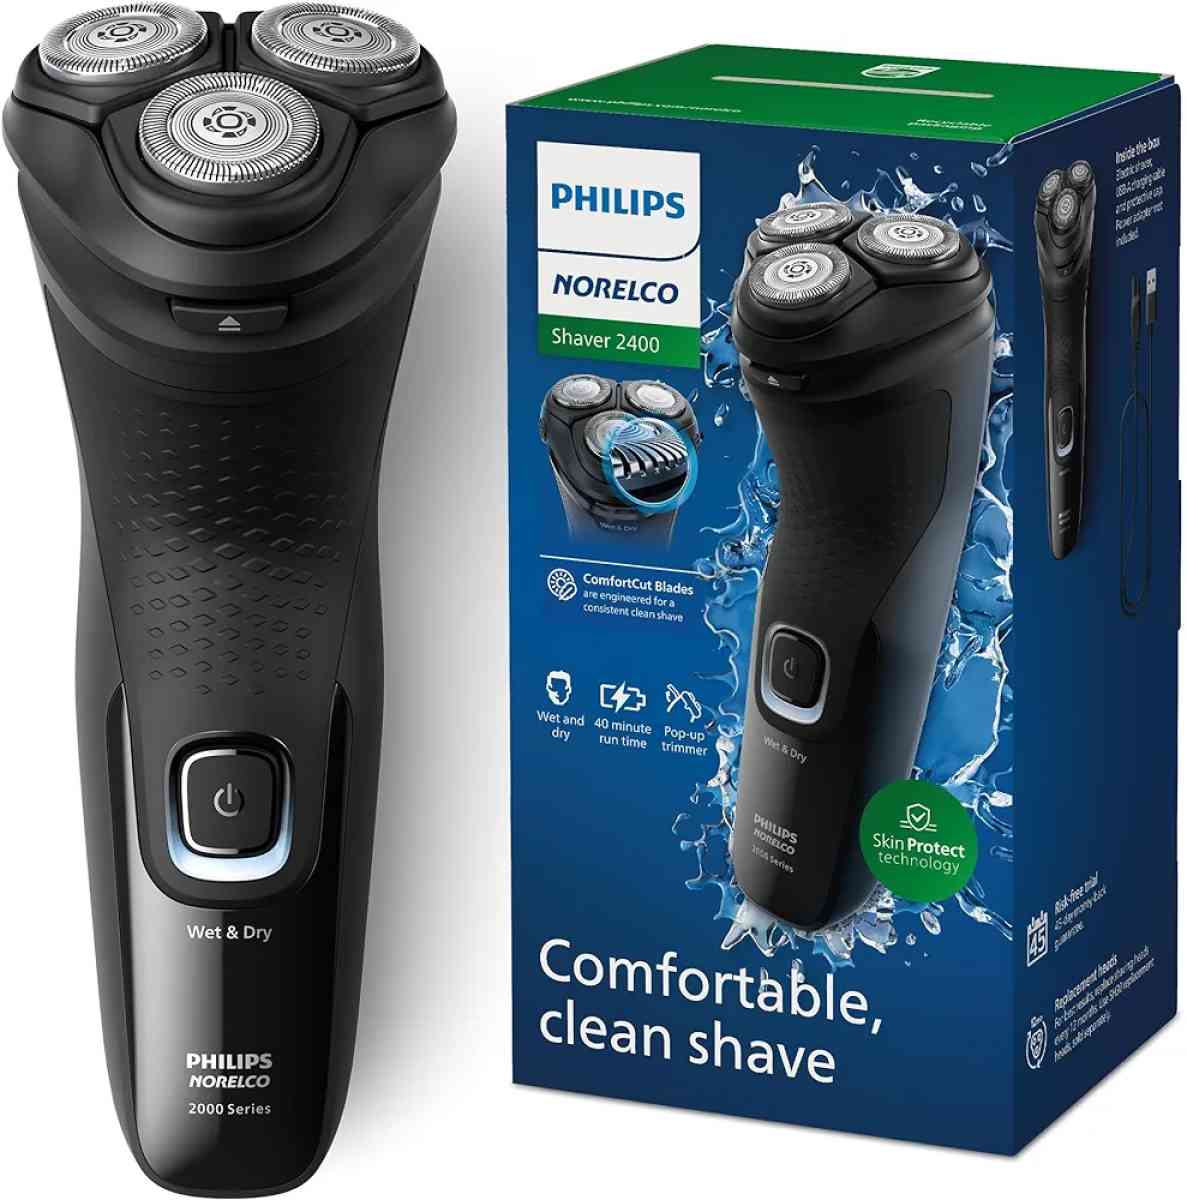 PHILLIPS NORELCO SHAVER 2400 COMFORTABLE CLEAN SHAVE